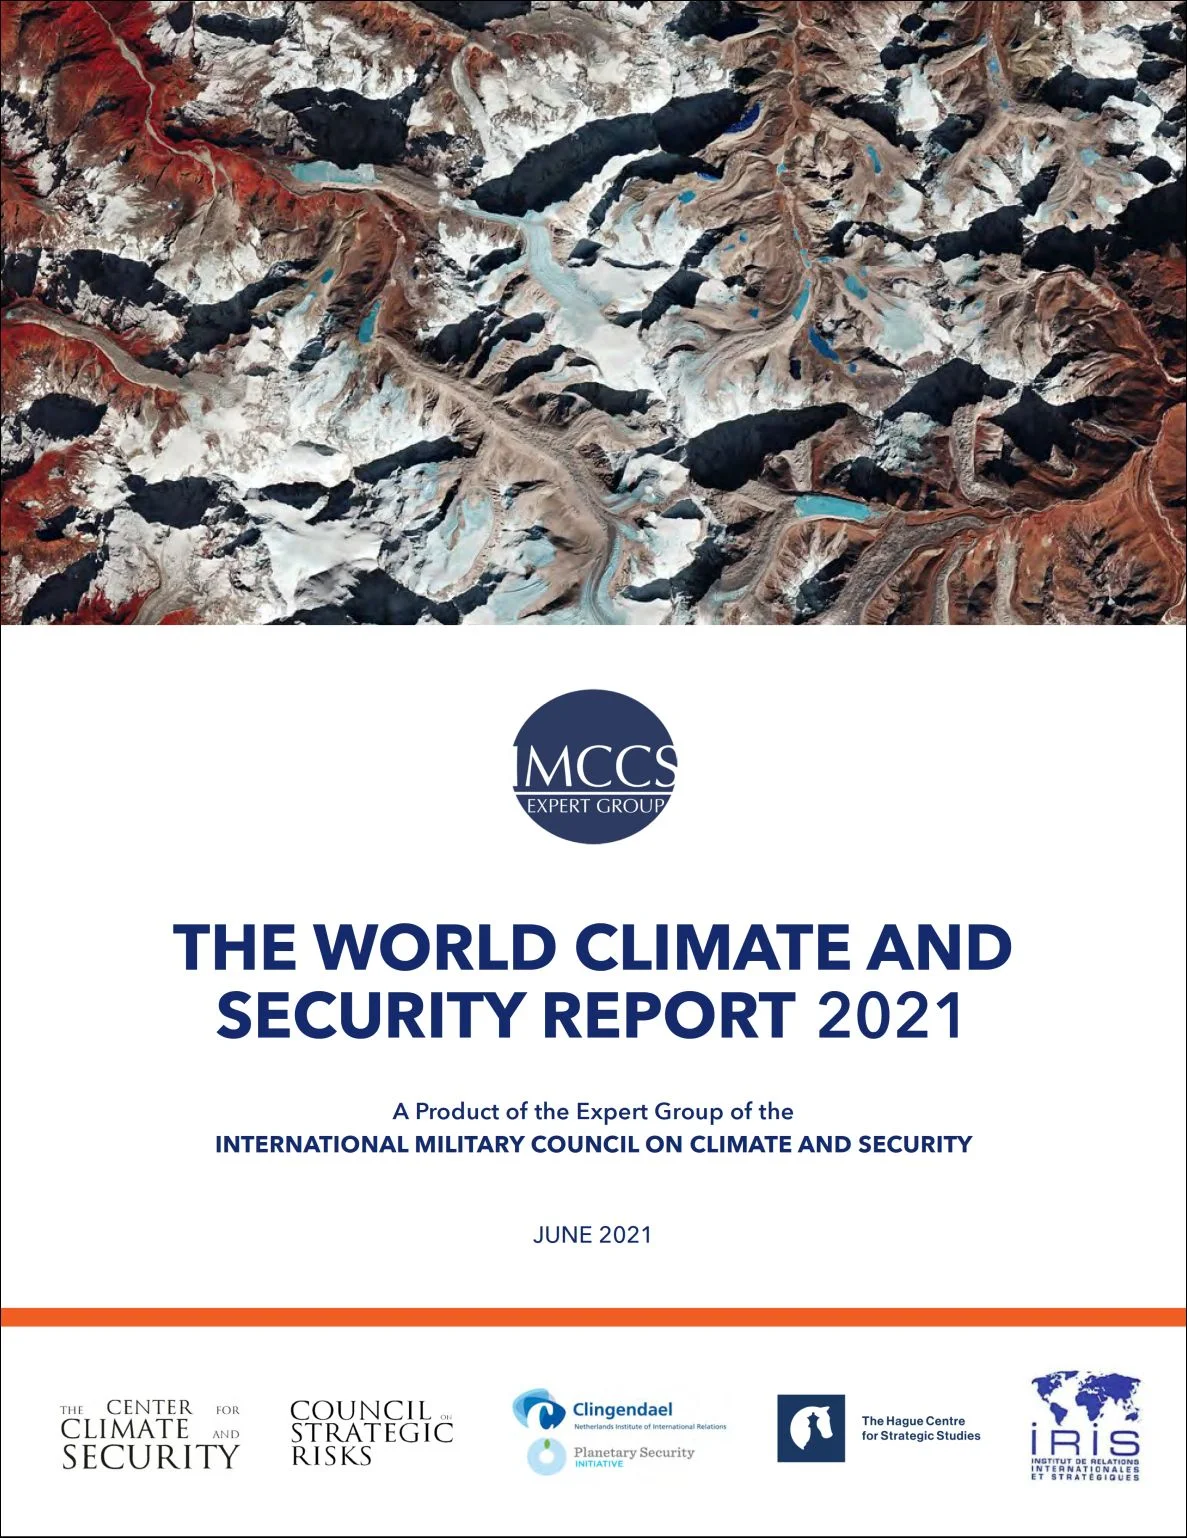 International Military Council Issues “World Climate and Security Report 2021” Warning of Catastrophic Climate Risks and Urging Significant Greenhouse Gas Reductions